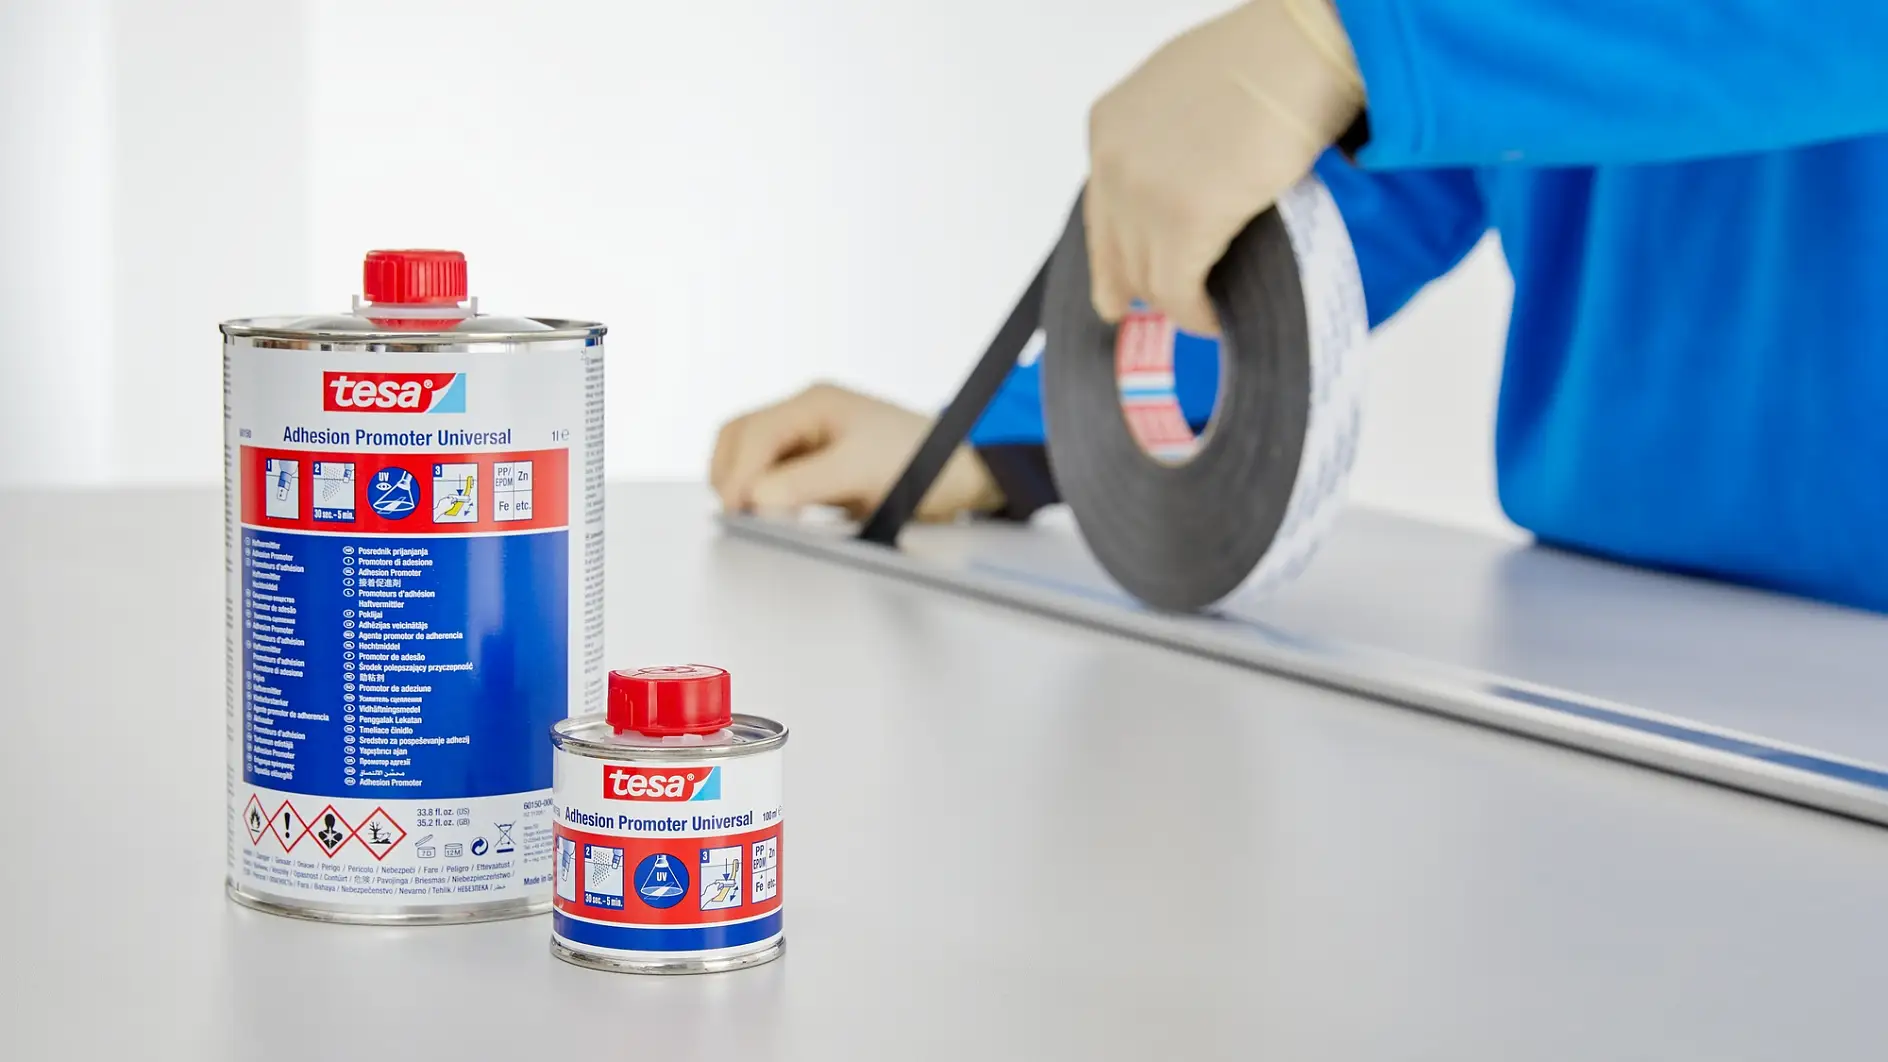 tesa-60150-surface-treatment-to-improve-adhesion-to-various-substrates-step3of3